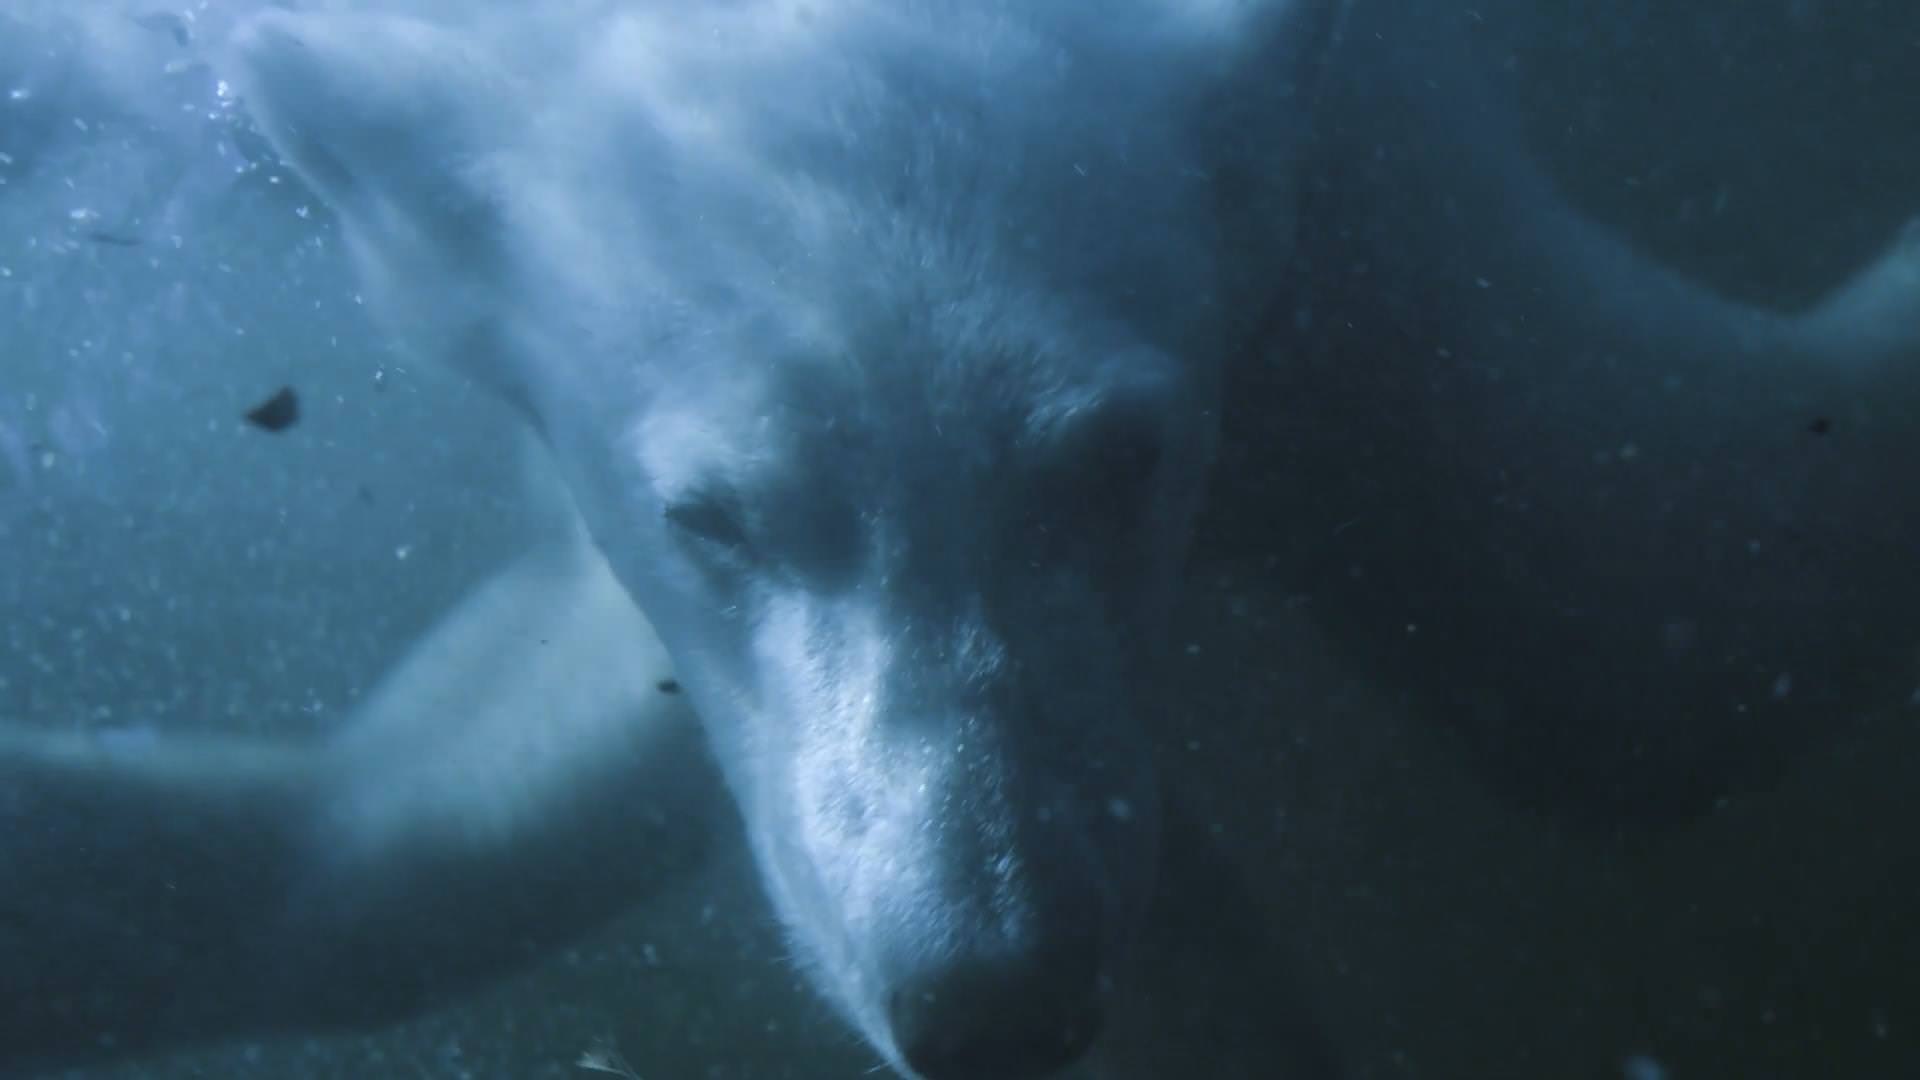 This image shows a polar bear swimming in water 